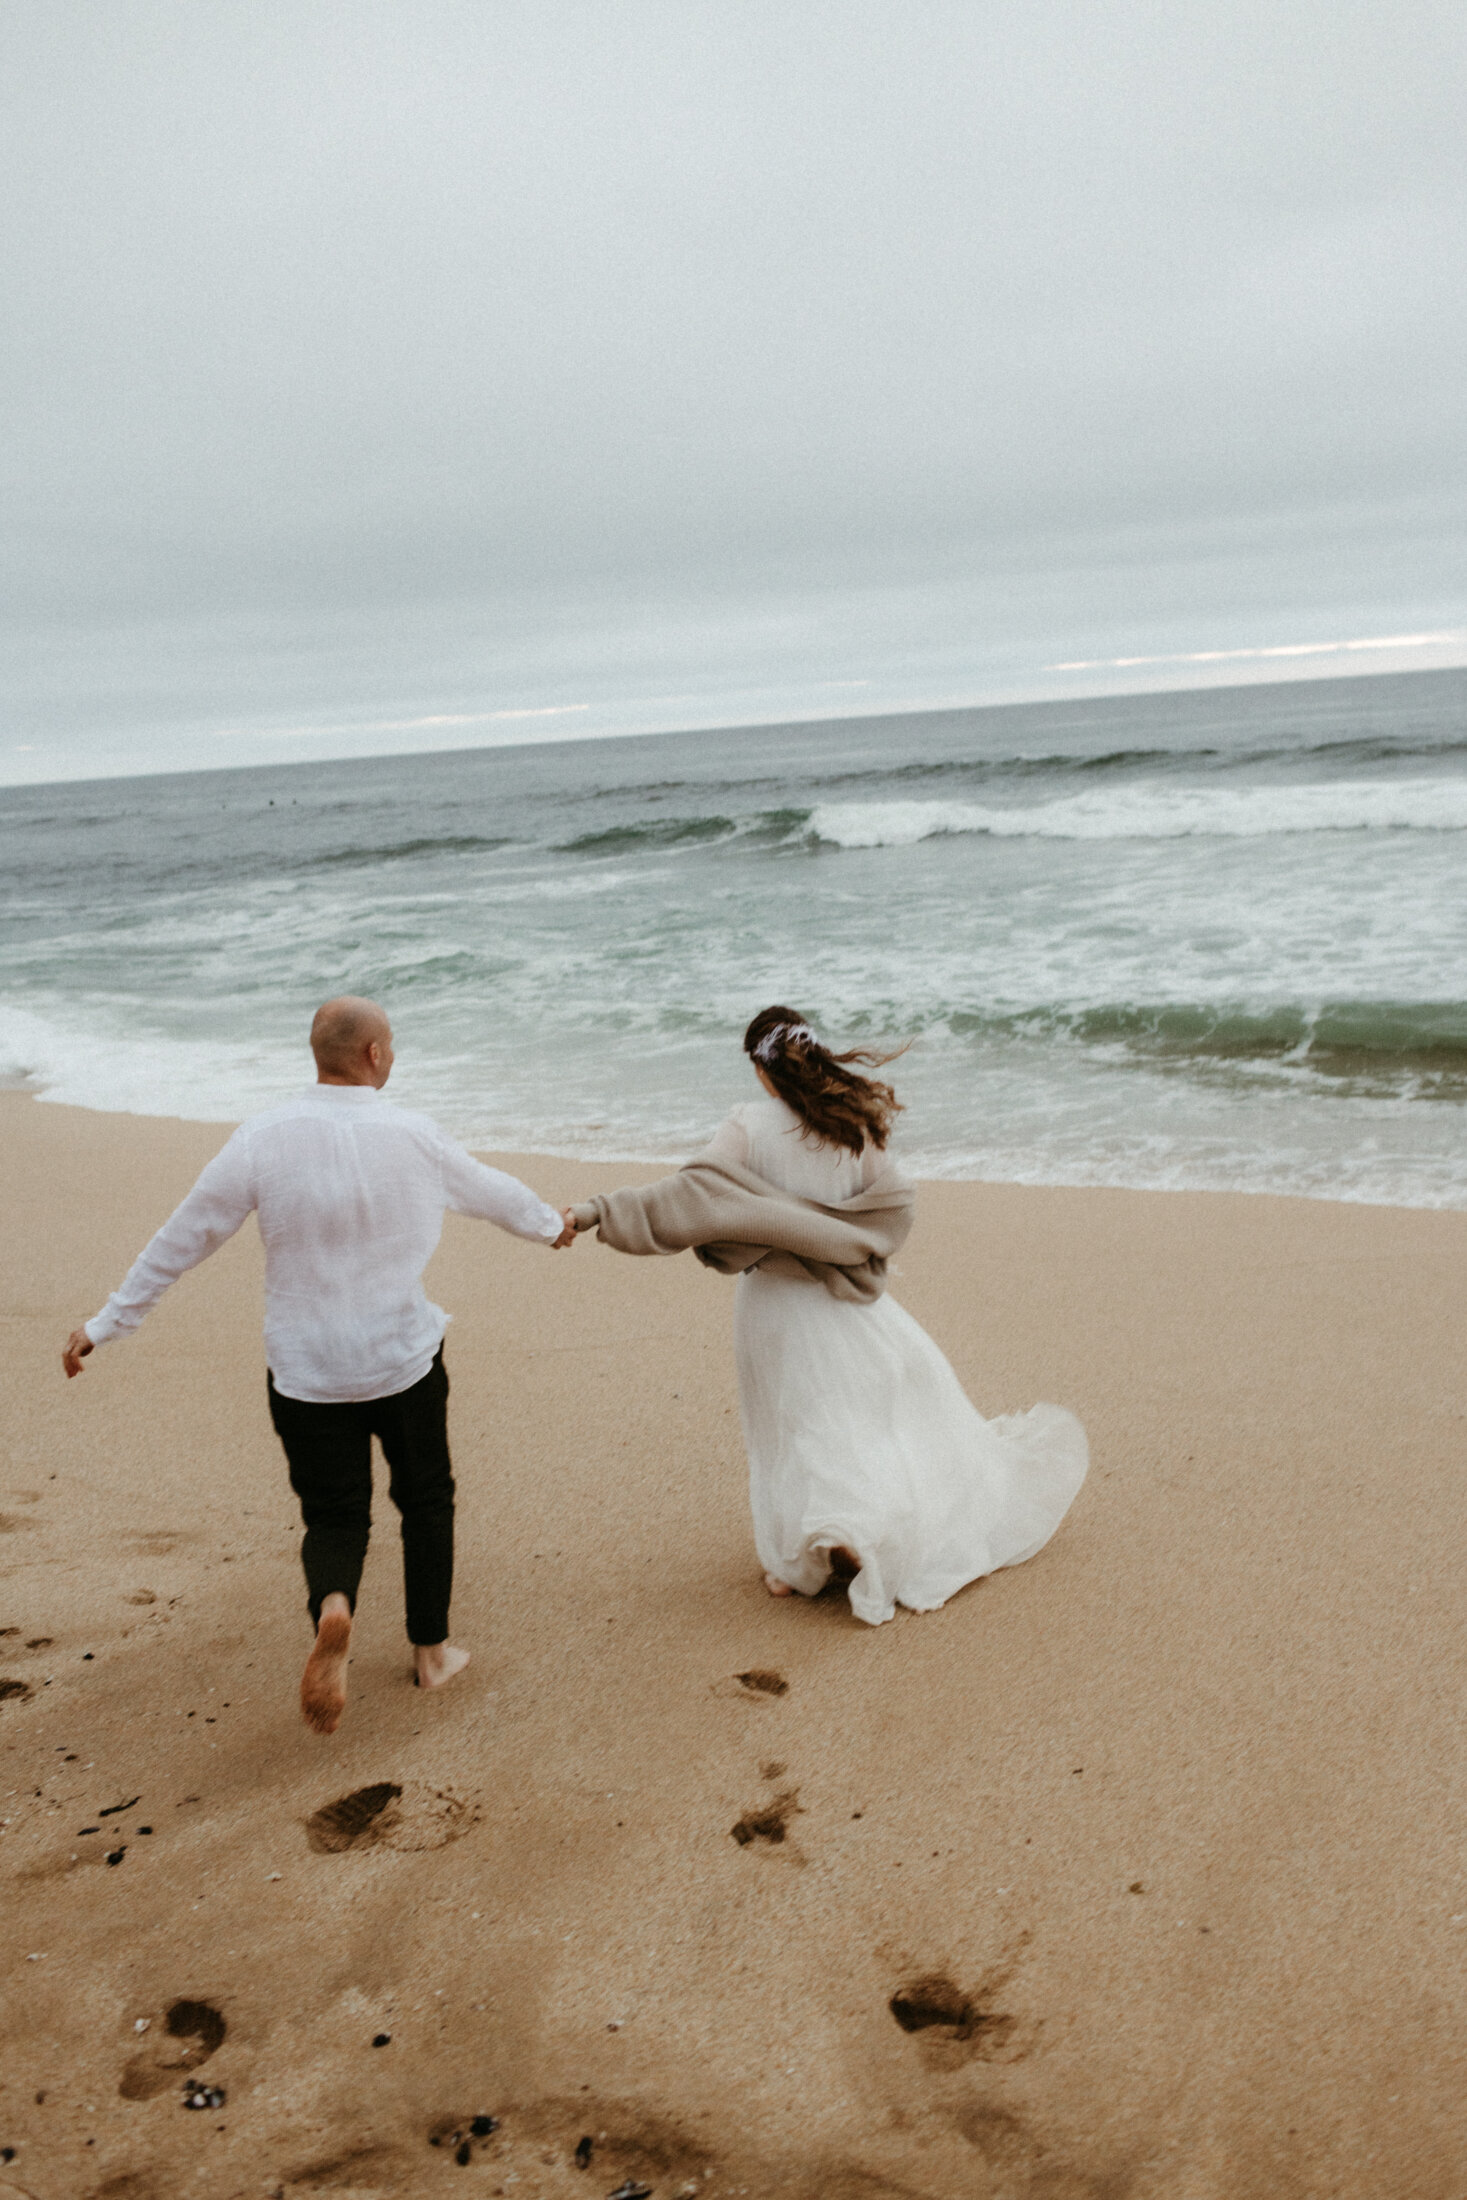 A joyful couple holds hands while running along a sandy beach towards the ocean in San Francisco, the woman's white dress billowing behind her on a cloudy day.